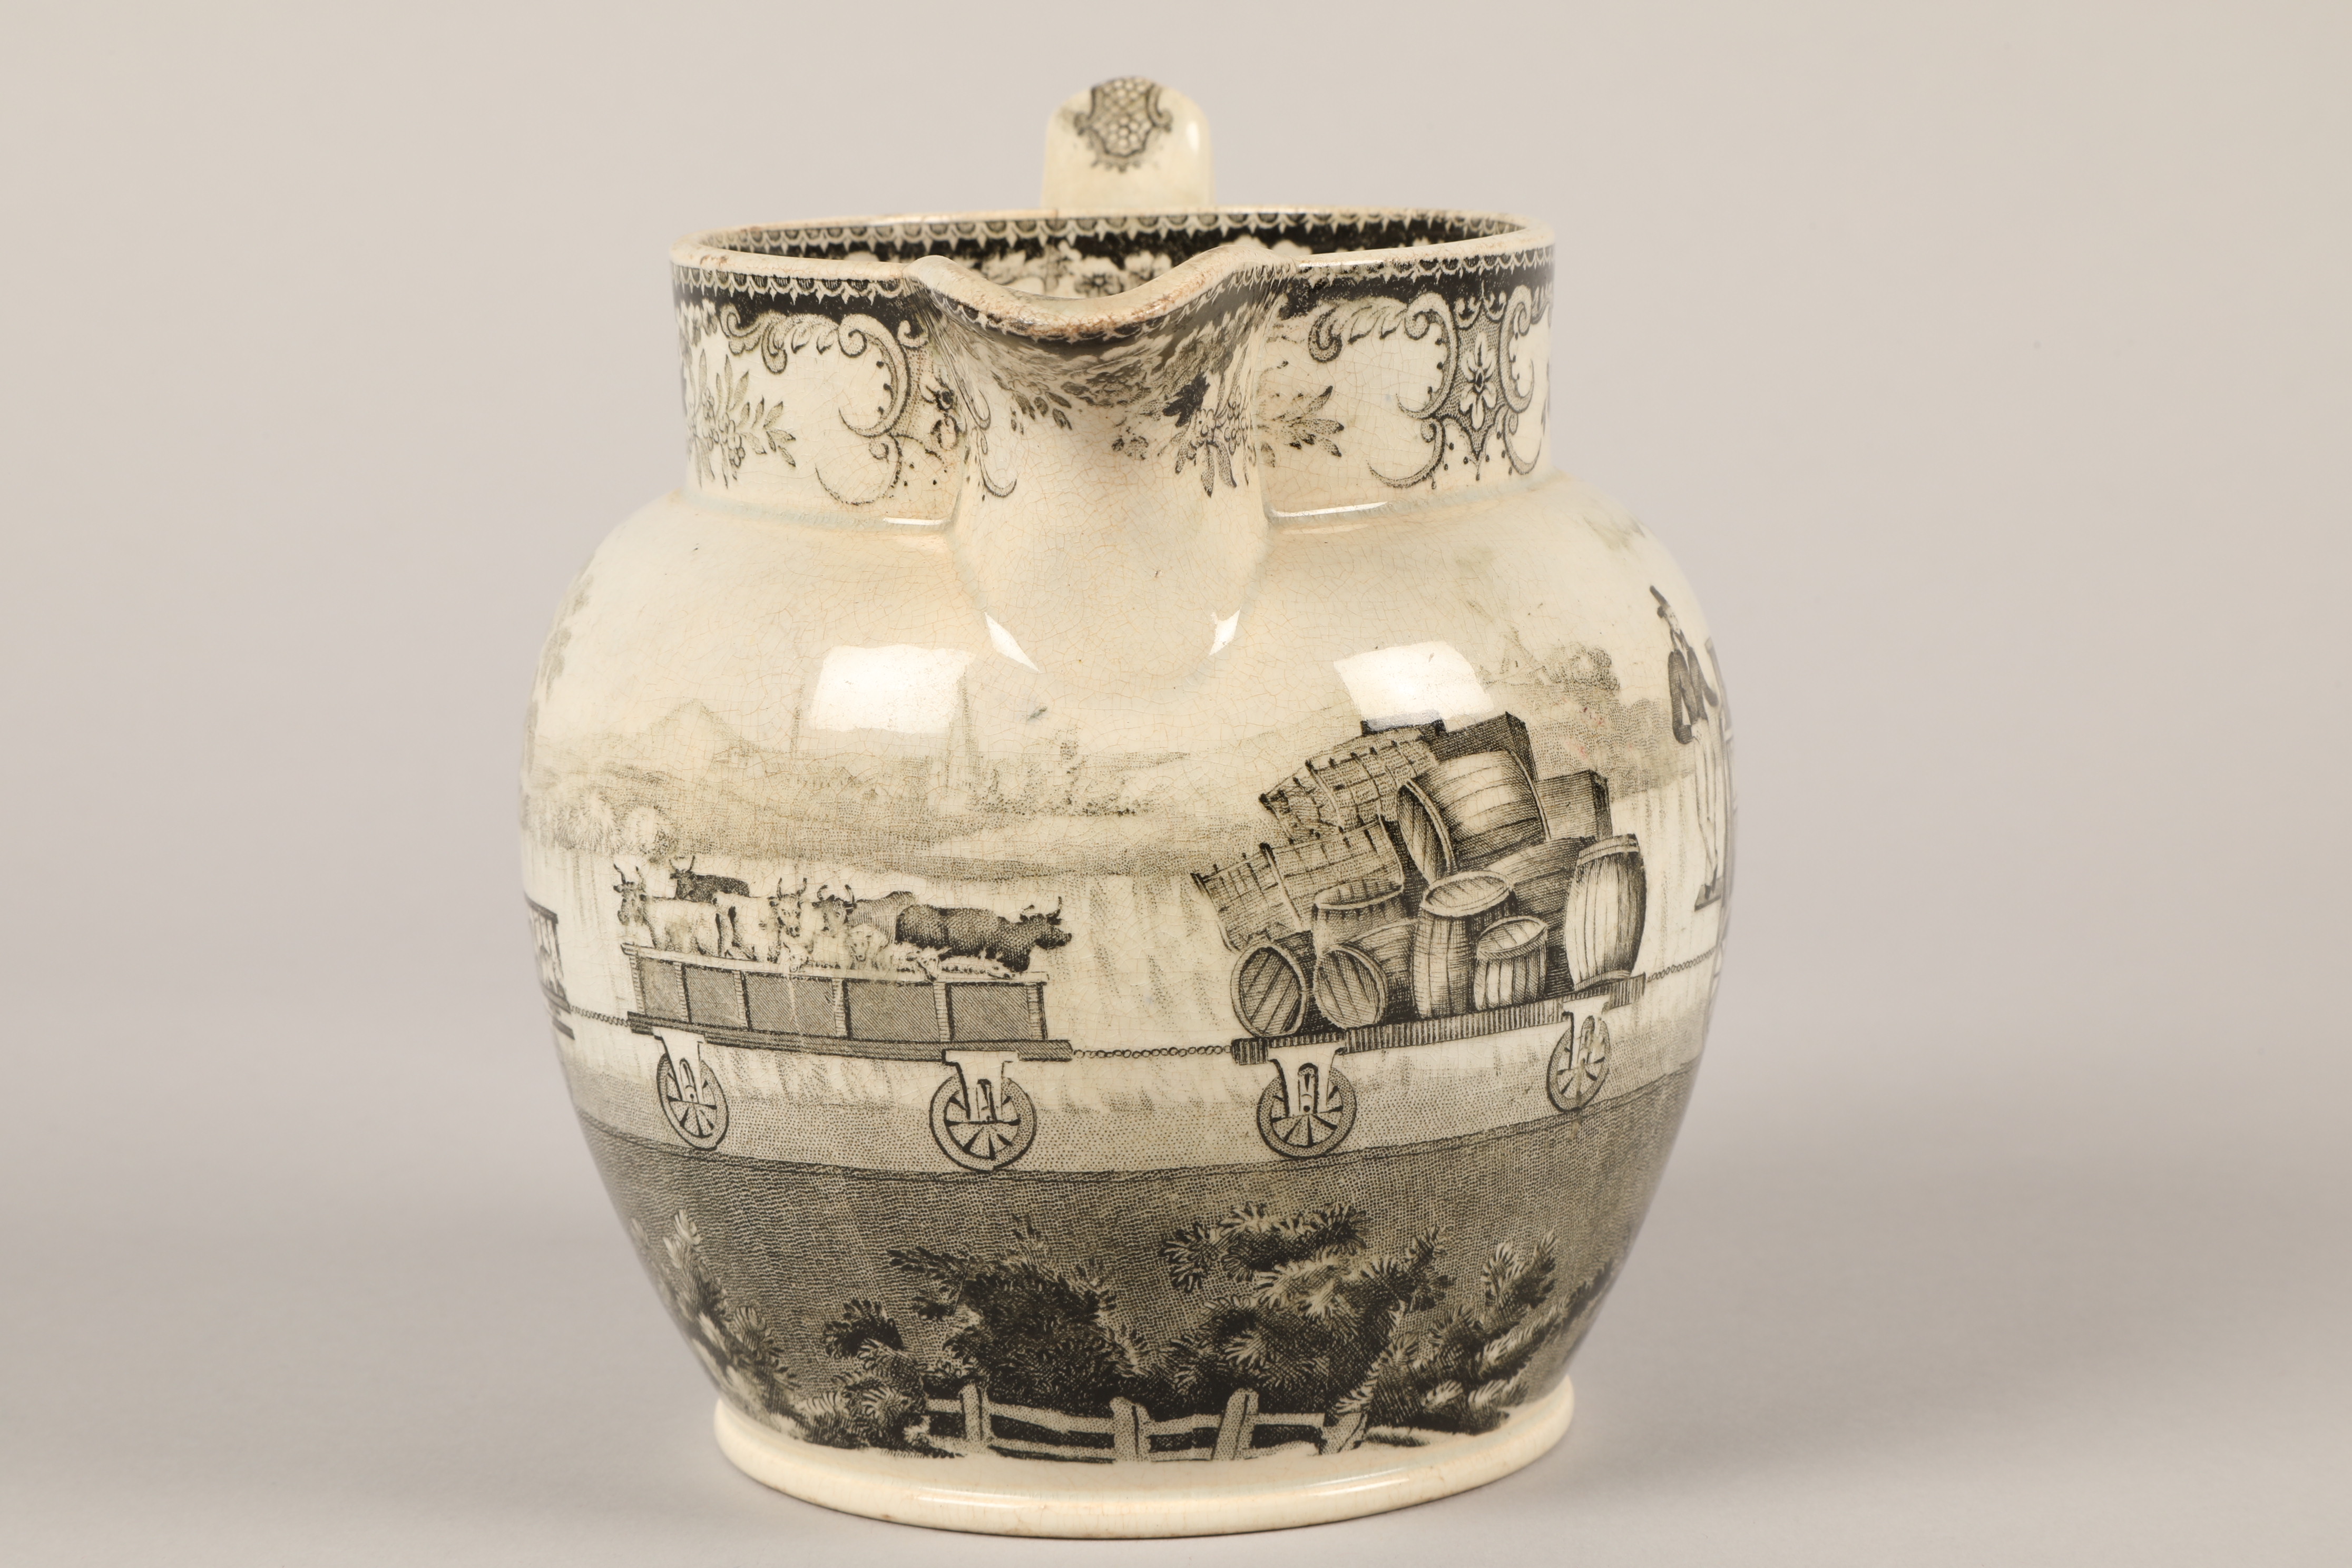 Liverpool creamware transfer printed jug, made by Herculaneum Factory, to commemorate the Rainhill - Image 6 of 8